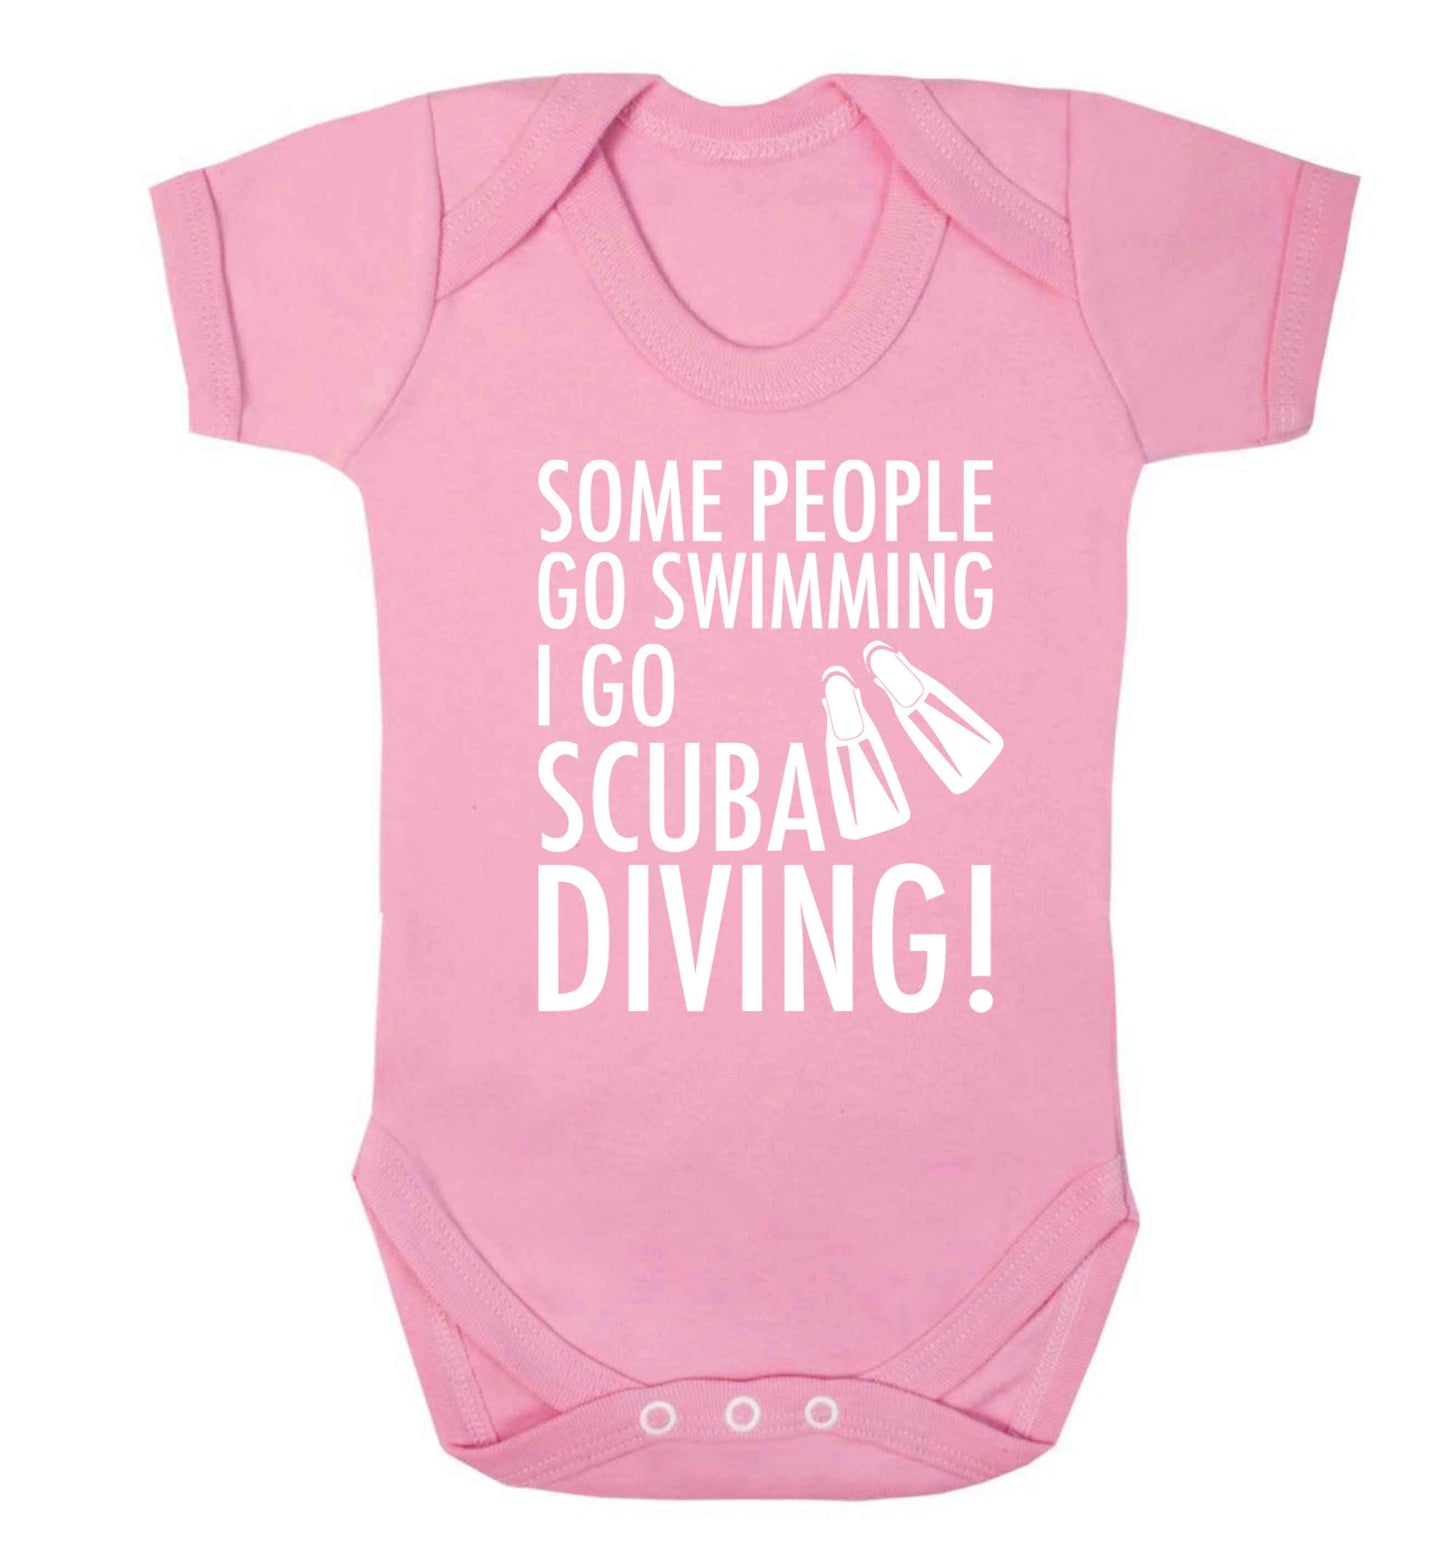 Some people go swimming I go scuba diving! Baby Vest pale pink 18-24 months